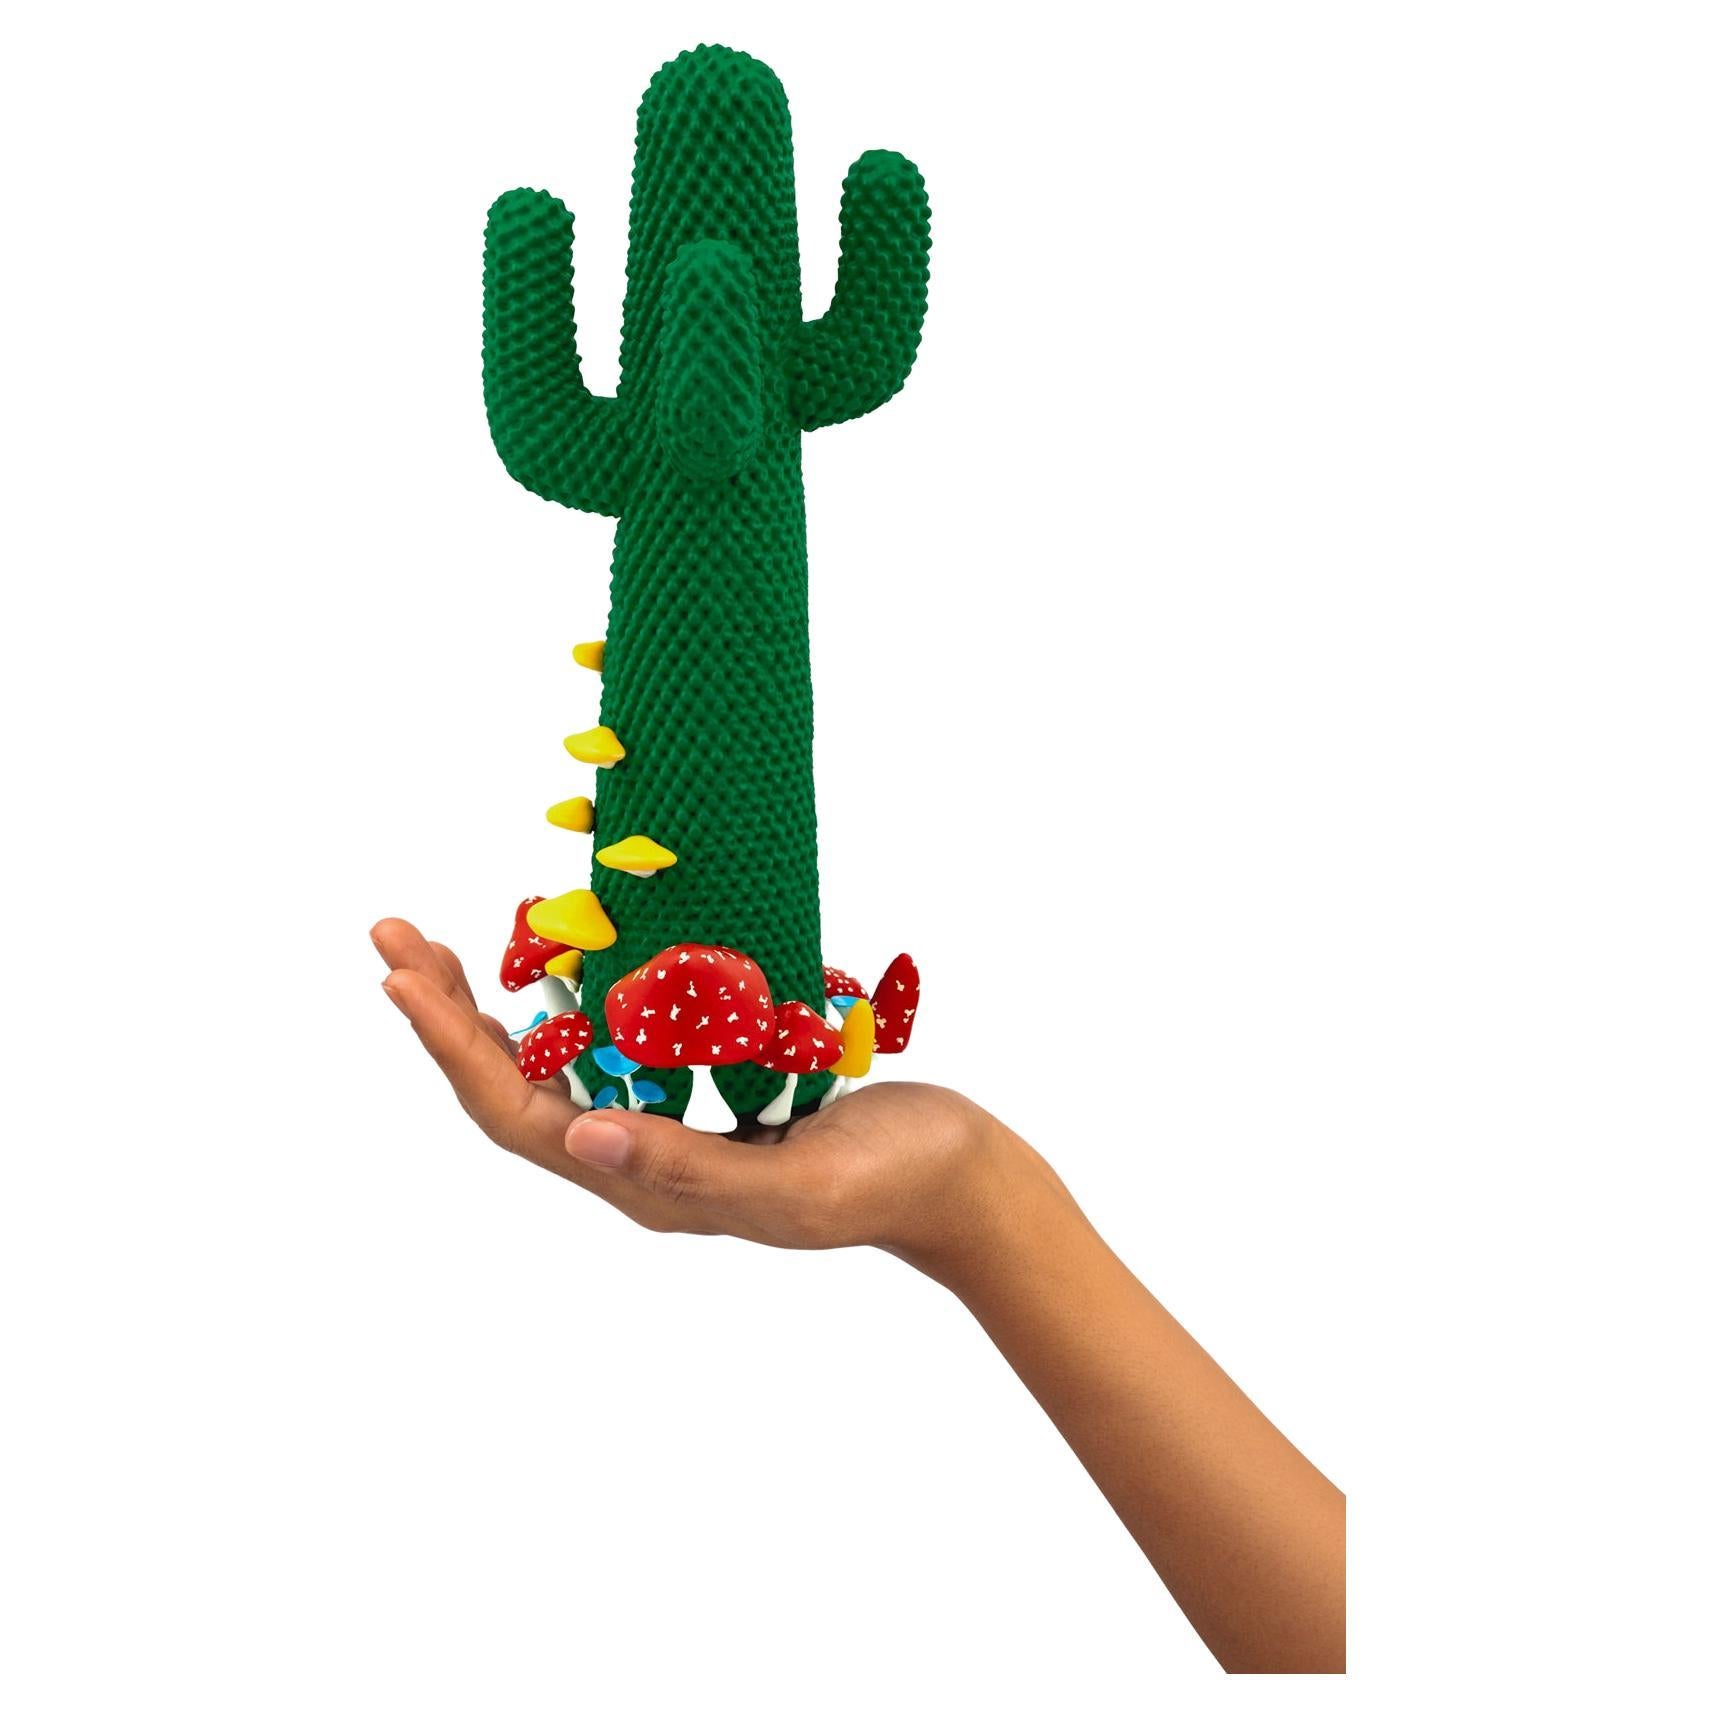 LIMITED EDITION #38/99

Gufram presents the miniaturised version of the Shroom CACTUS® created in collaboration with A$AP Rocky and the artist’s new design studio HOMMEMADE Exactly as the real-size Shroom CACTUS®, the new Guframini piece features